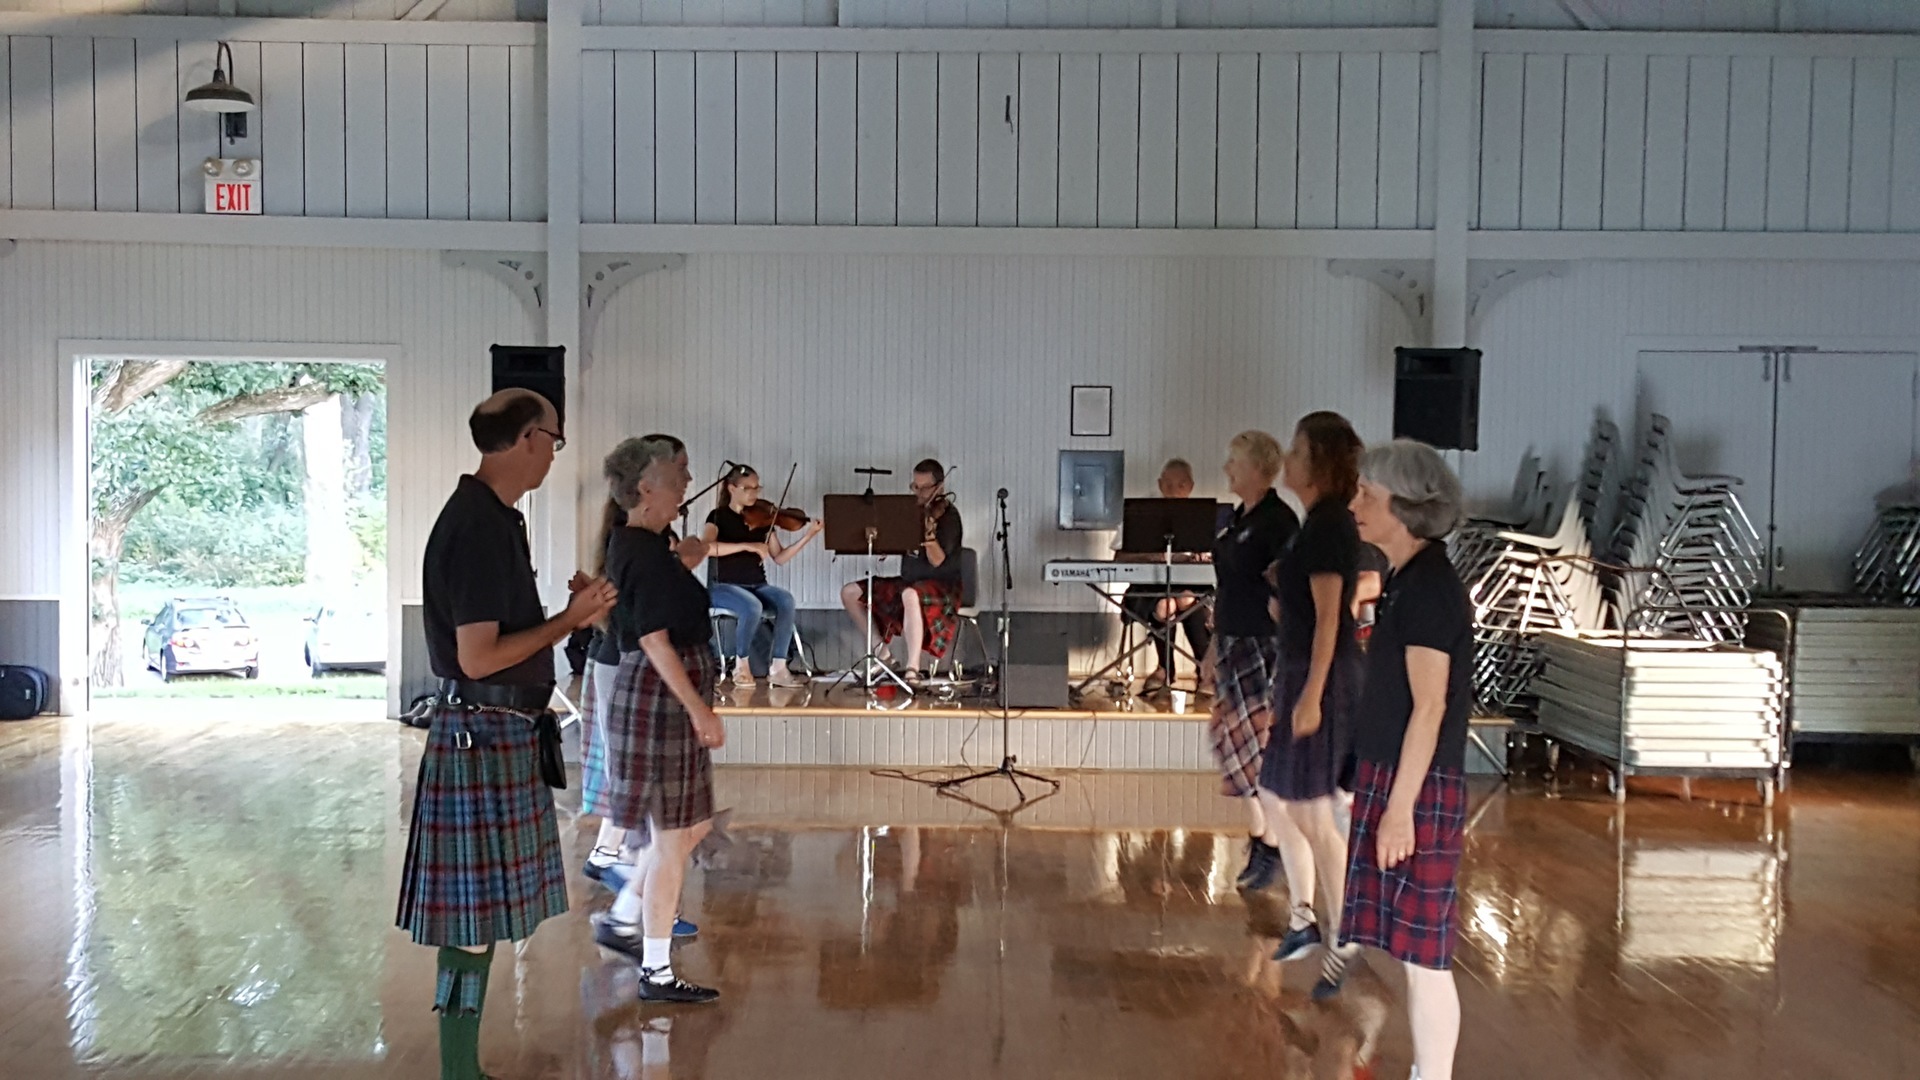 FOOT-Loose FREE Scottish Dance Lessons, Friday, May 6th in Olin Pavilion, 6-8 PM, Madison, Wisconsin, United States